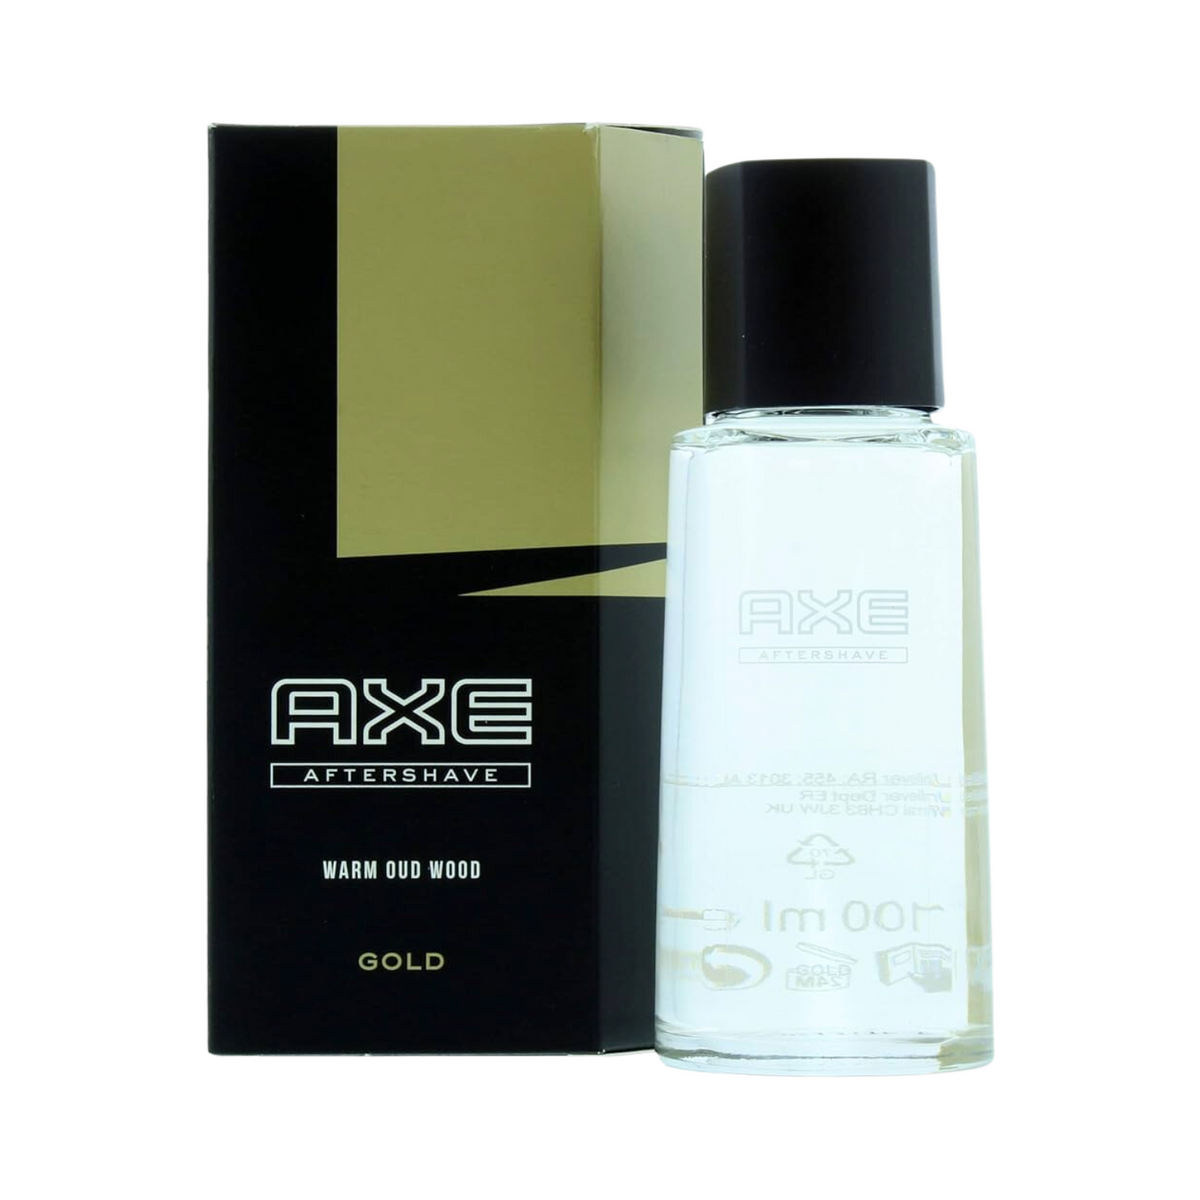 axe-after-shave-warm-oud-wood-gold-100ml